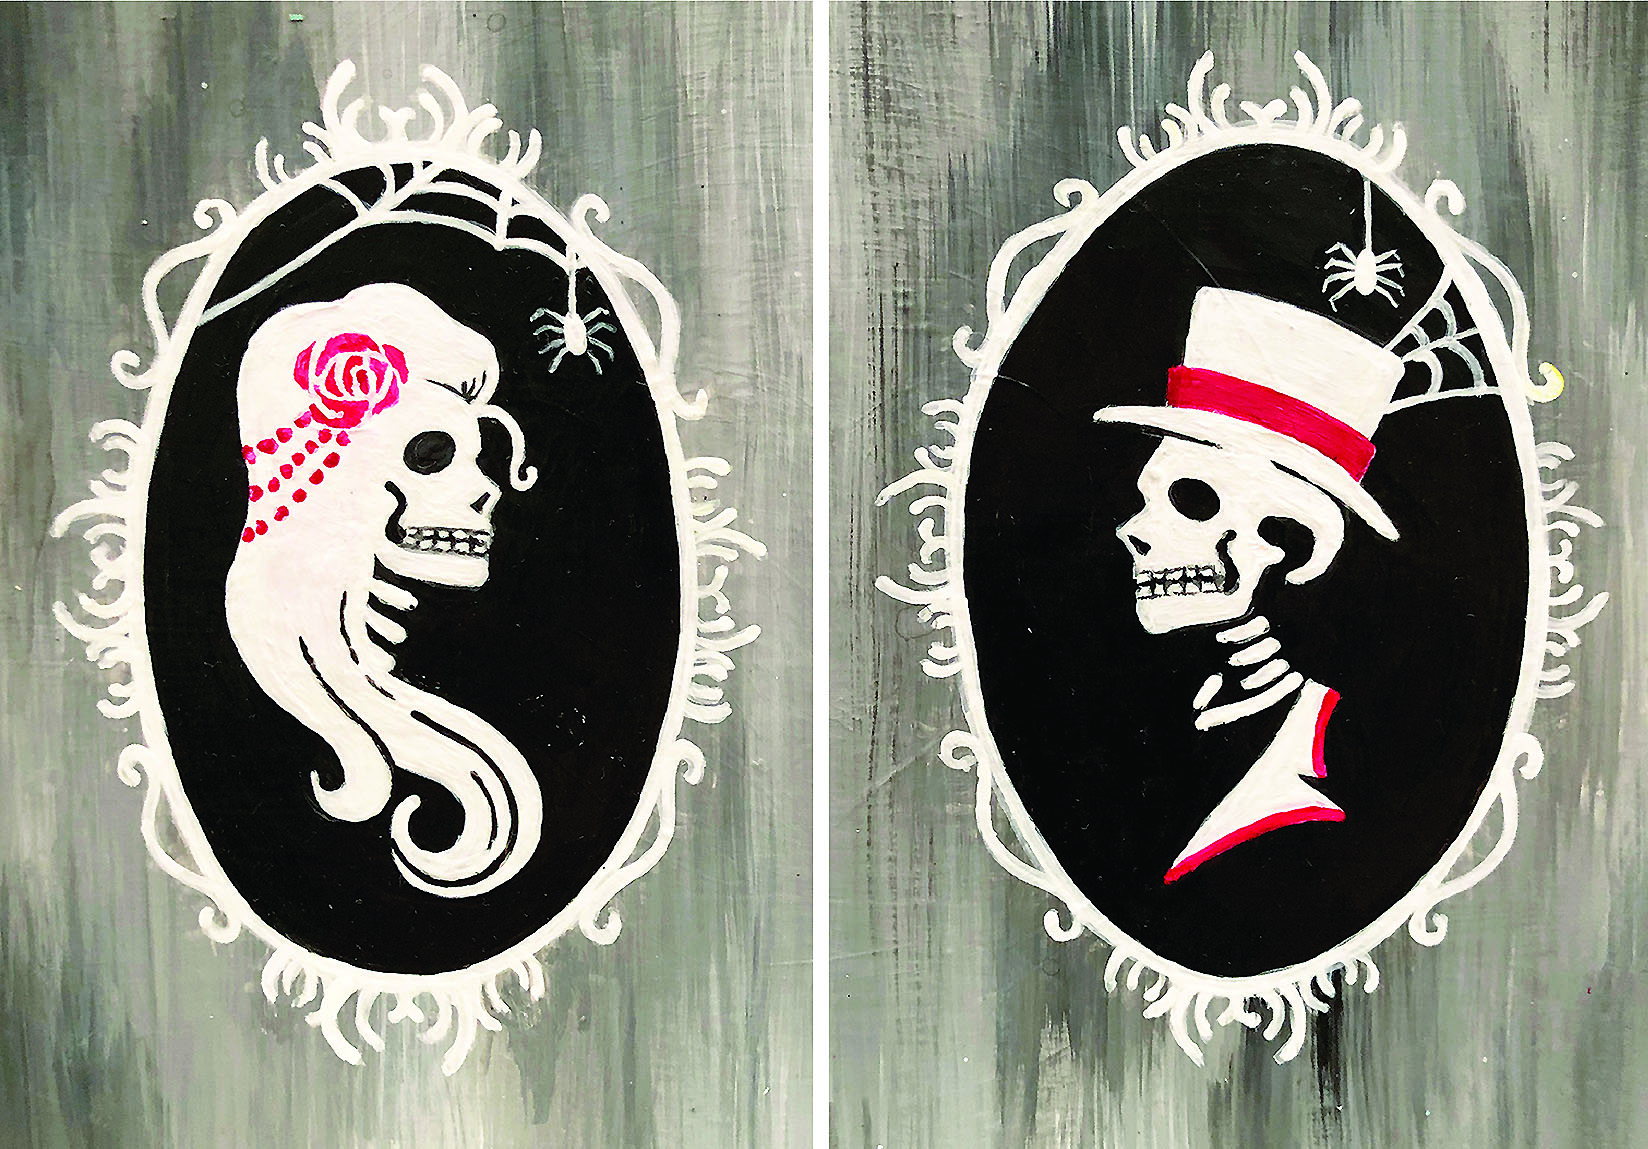 A Rosa and Juan Skull Cameos Partner Painting experience project by Yaymaker